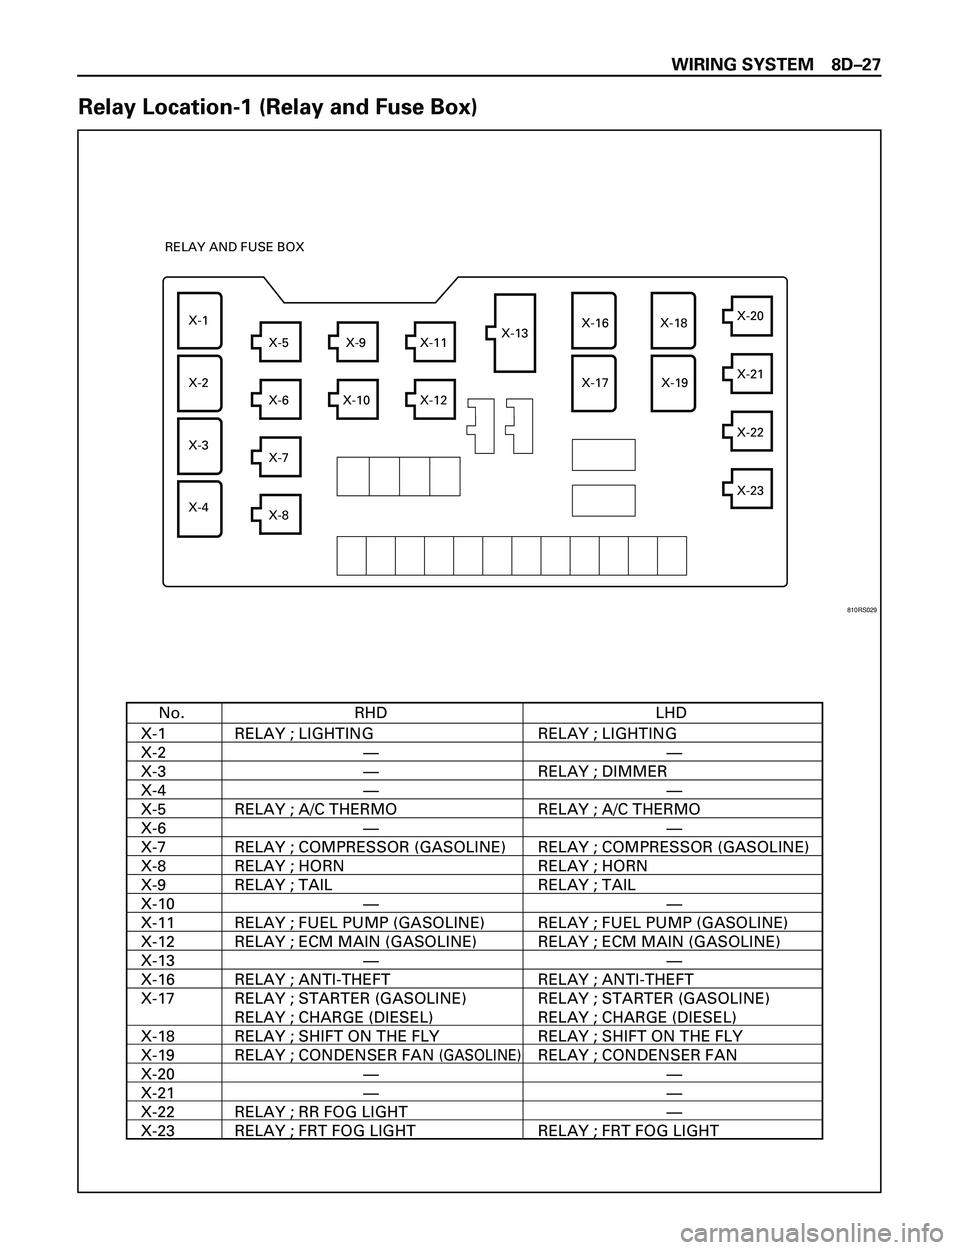 ISUZU TROOPER 1998  Service User Guide WIRING SYSTEM 8DÐ27
Relay Location-1 (Relay and Fuse Box)
RHDNo.
X-1
X-2
X-3
X-4
X-5
X-6
X-7
X-8
X-9
X-10
X-11
X-12
X-13
X-16
X-17
X-18
X-19
X-20
X-21
X-22
X-23LHD
RELAY ; LIGHTING
RELAY ; A/C THERMO